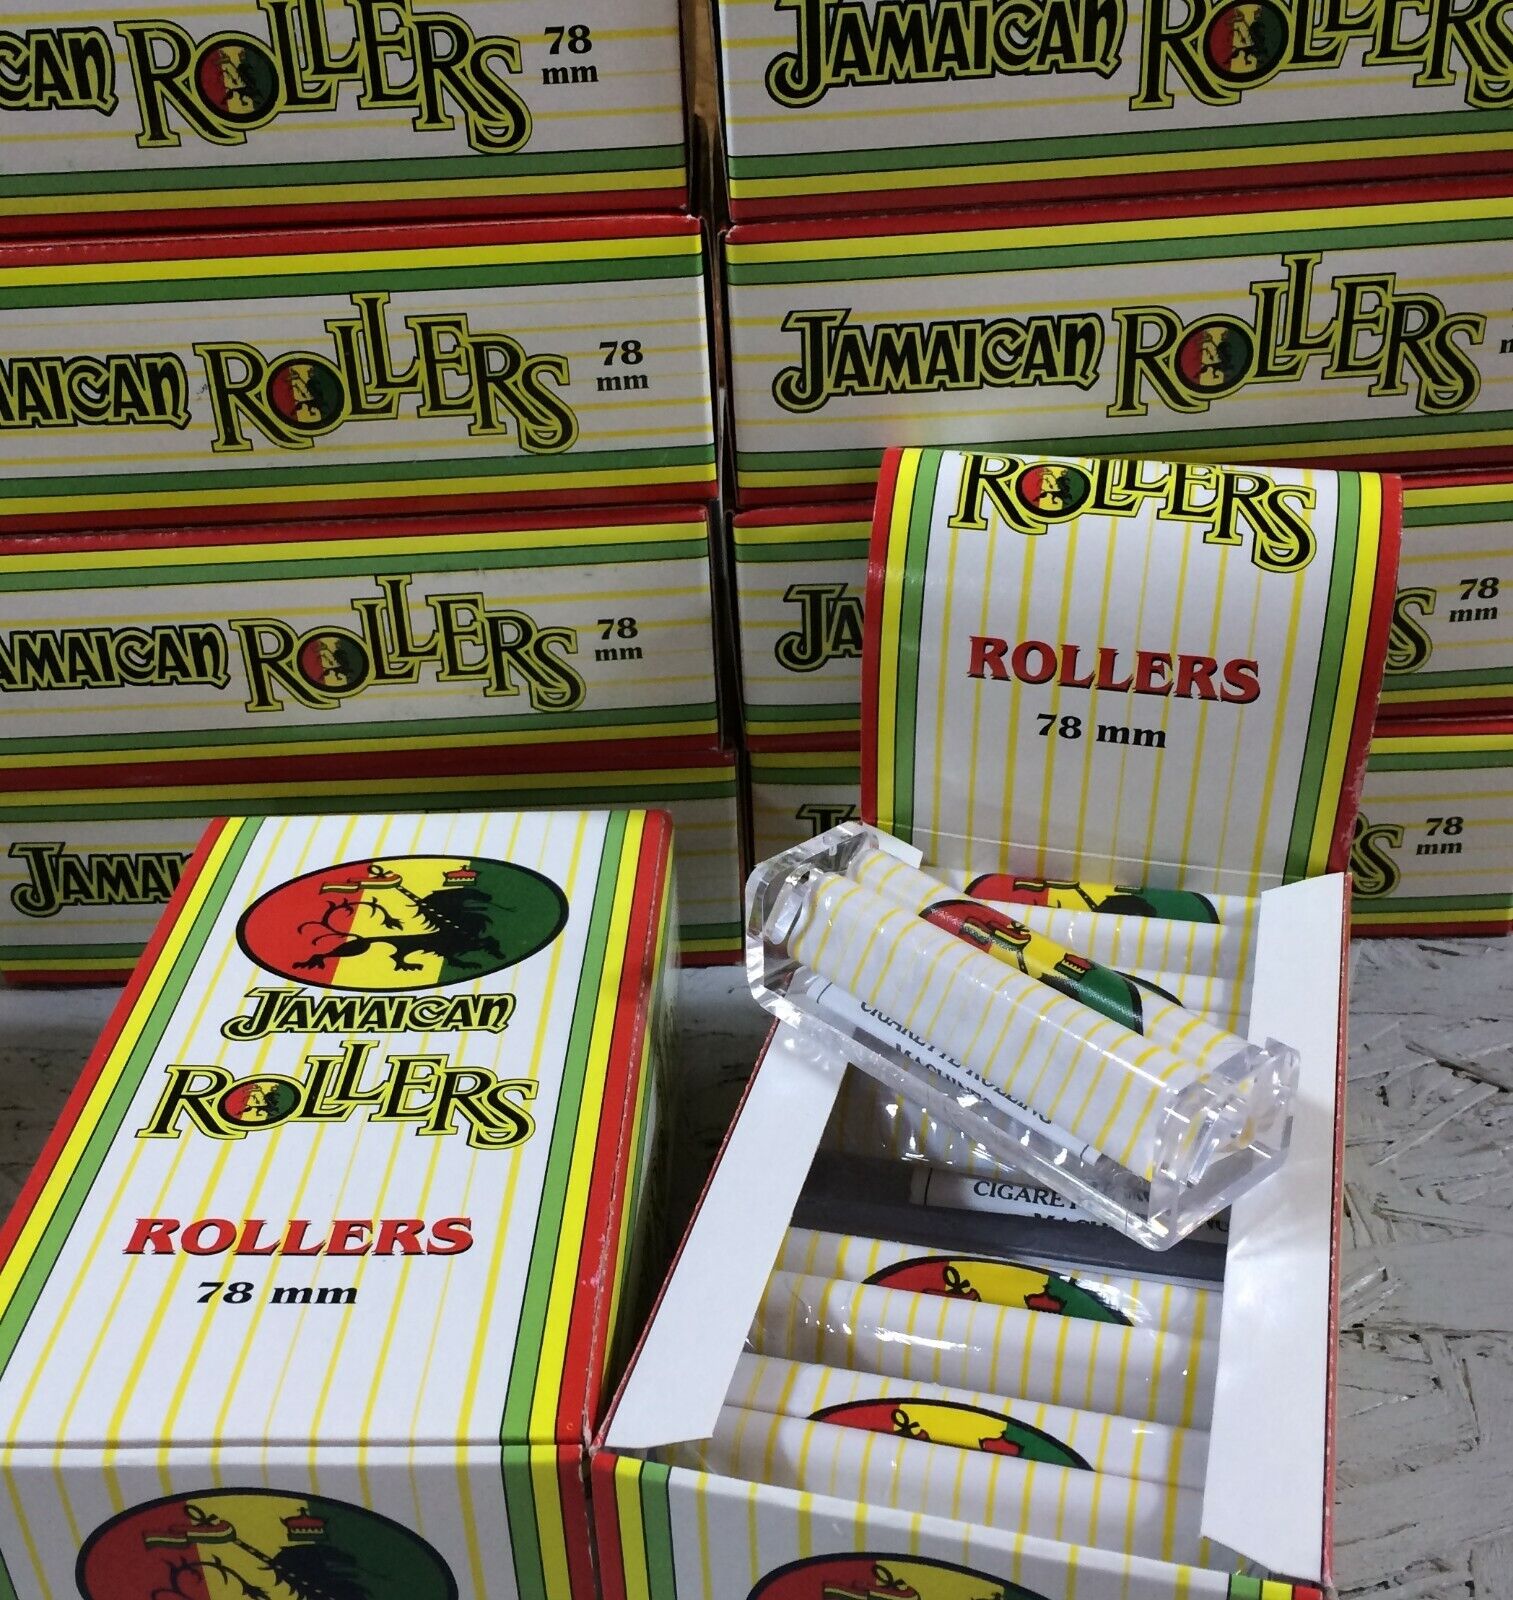 BUY TWO of 12 COUNT BOX COUNTER TOP DISPLAYS - JAMAICAN ROLLING MACHINES 78MM